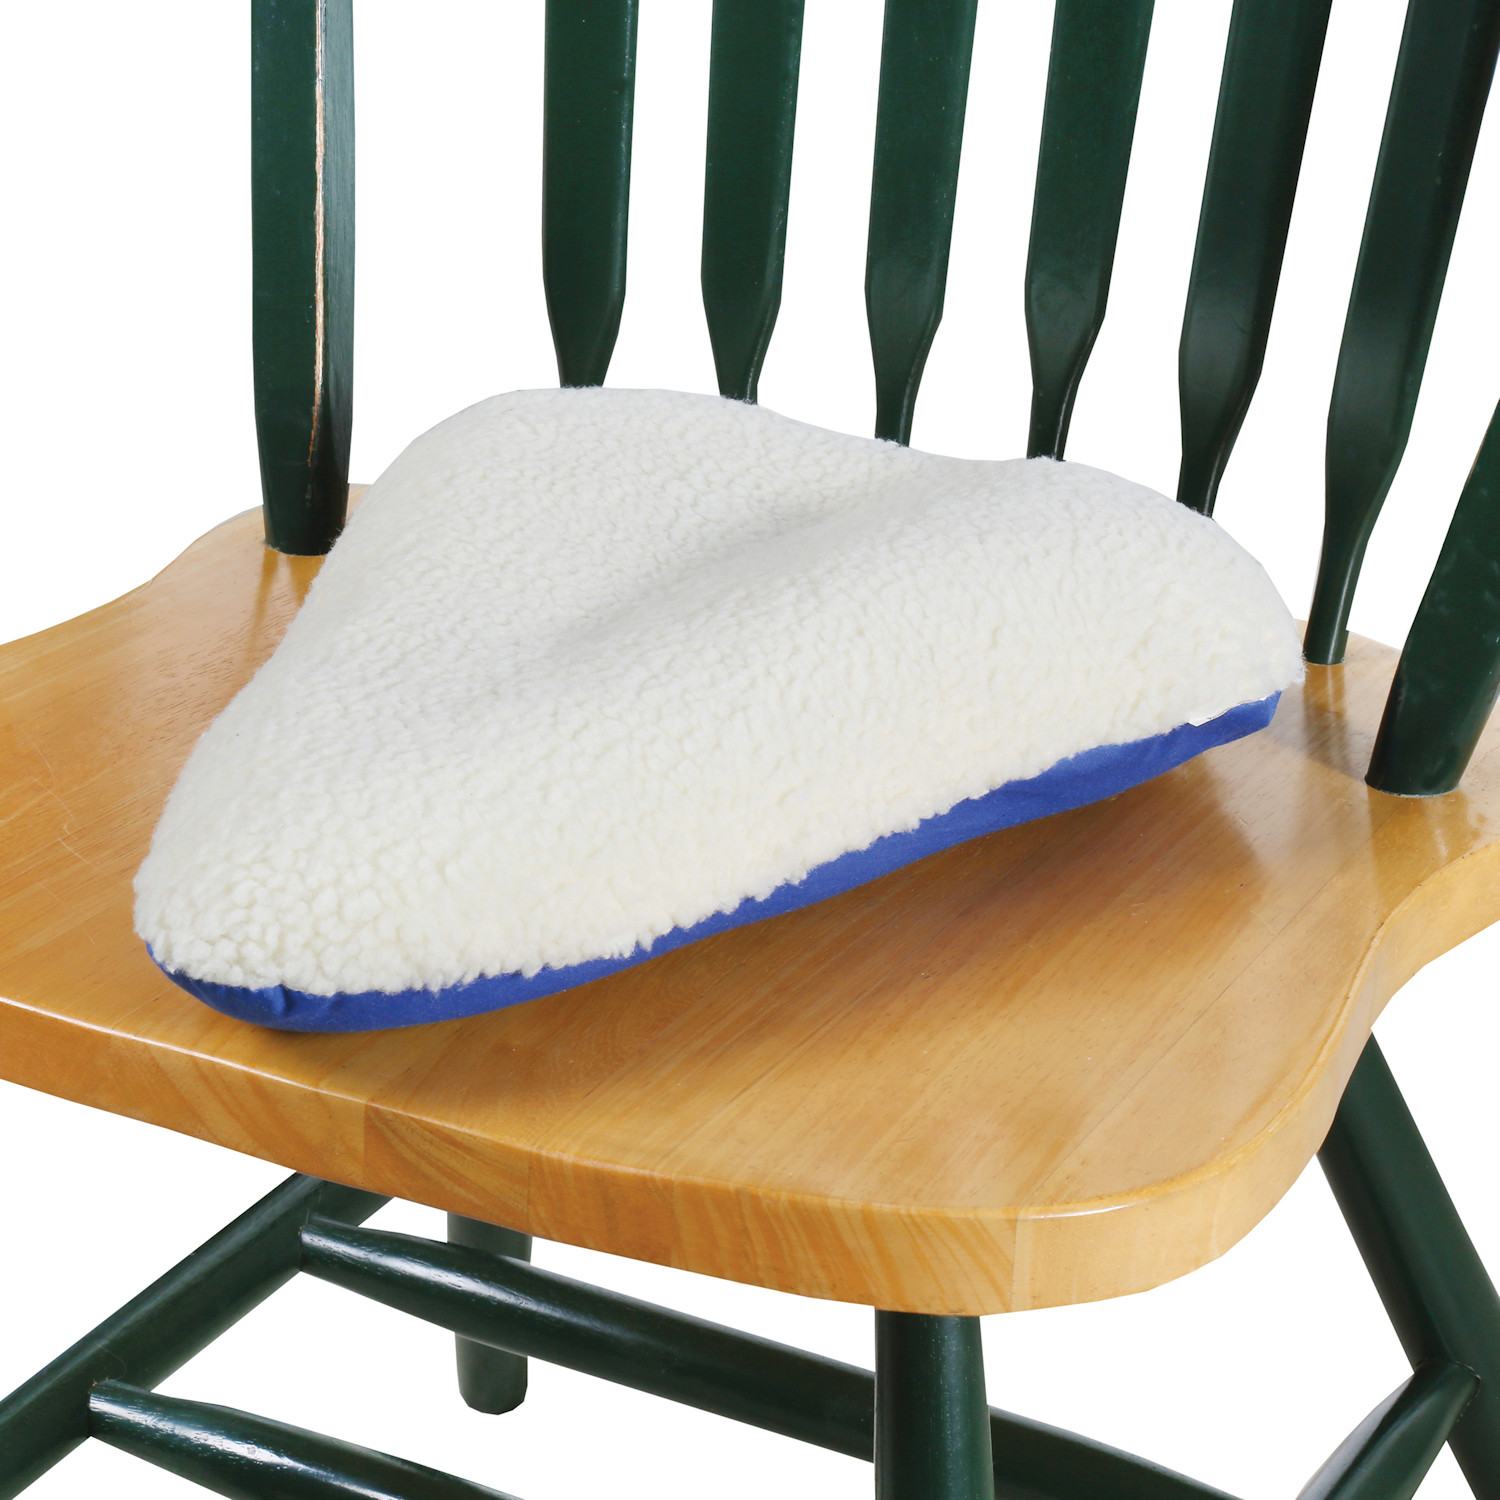 Sciatica Support Chair Pillow - Saddle Shaped Orthopedic Cushion | eBay